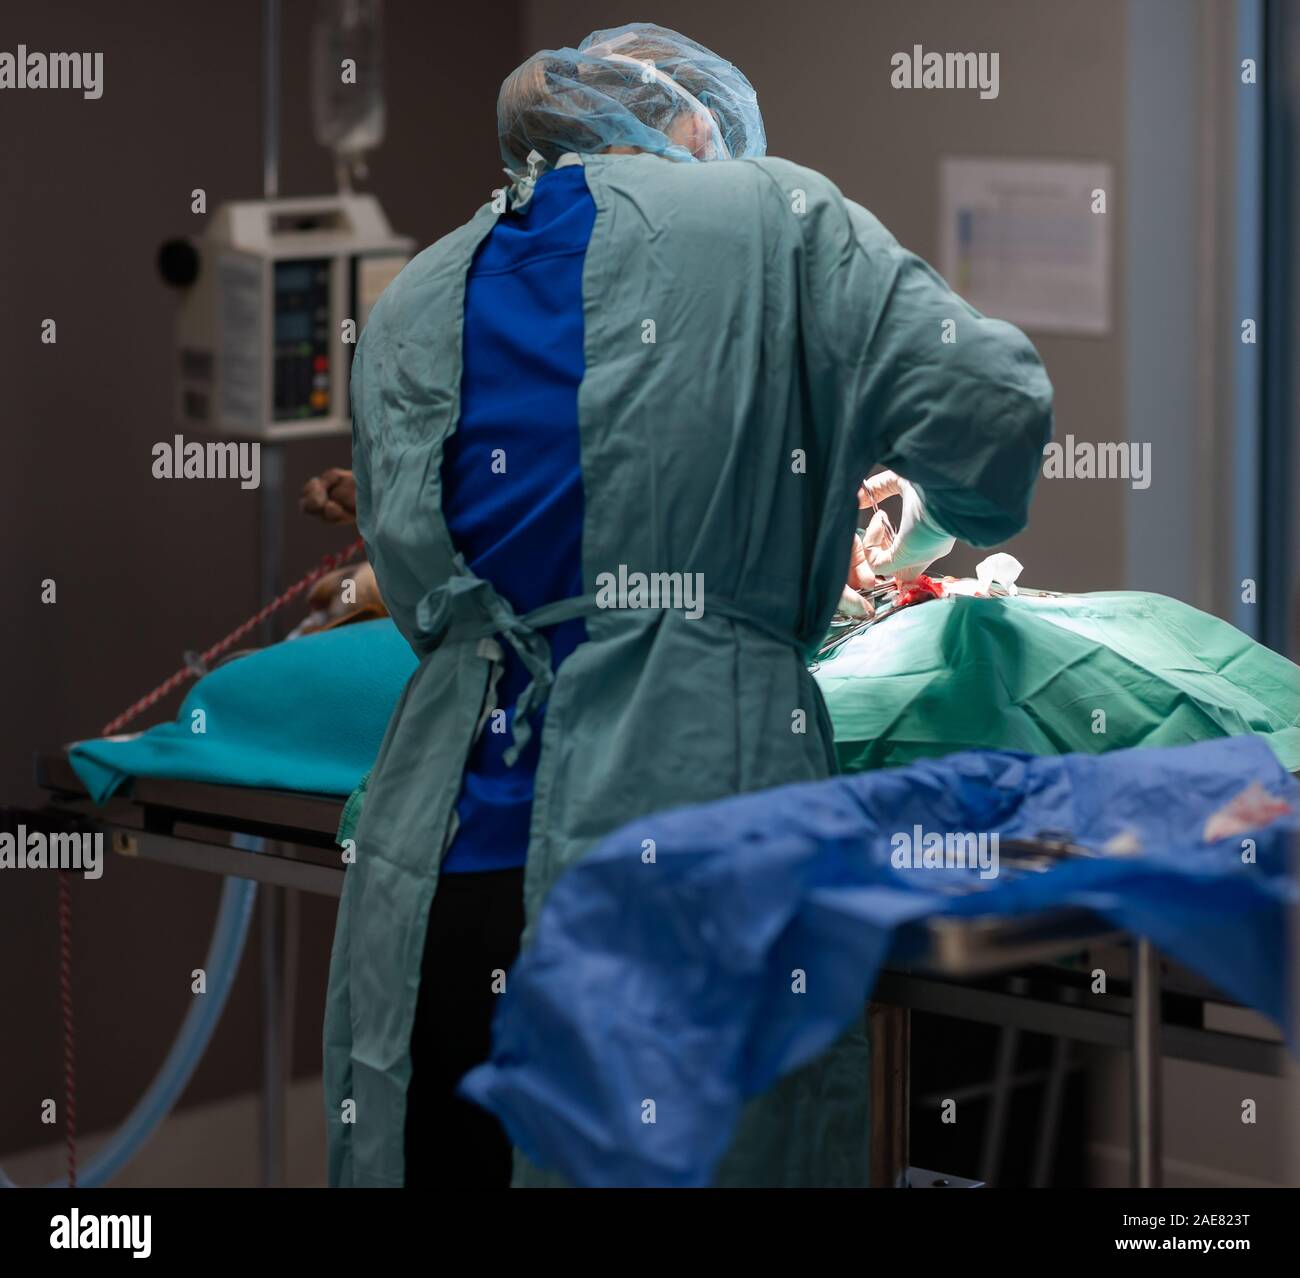 A veterinary surgeon performs an operation on a canine inside a the operating room at a veterinary clinic. Stock Photo